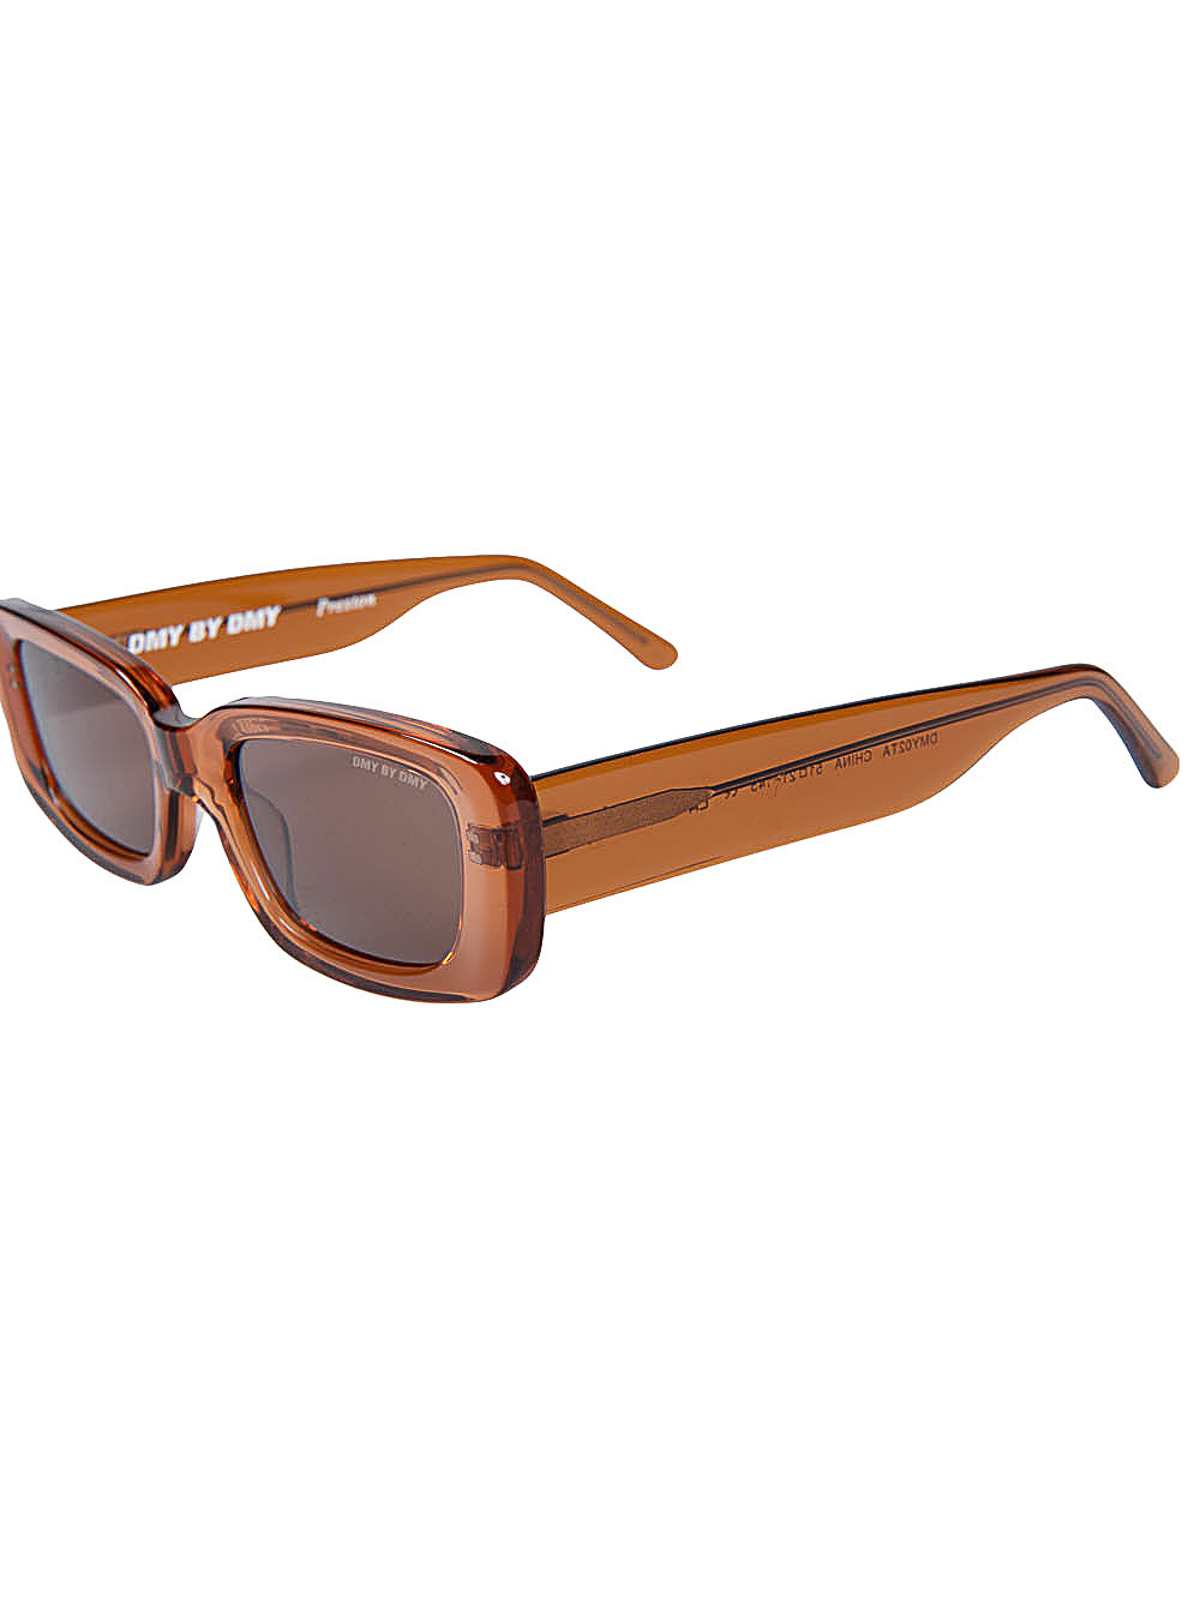 Shop Dmy By Dmy Branded Sunglasses In Brown